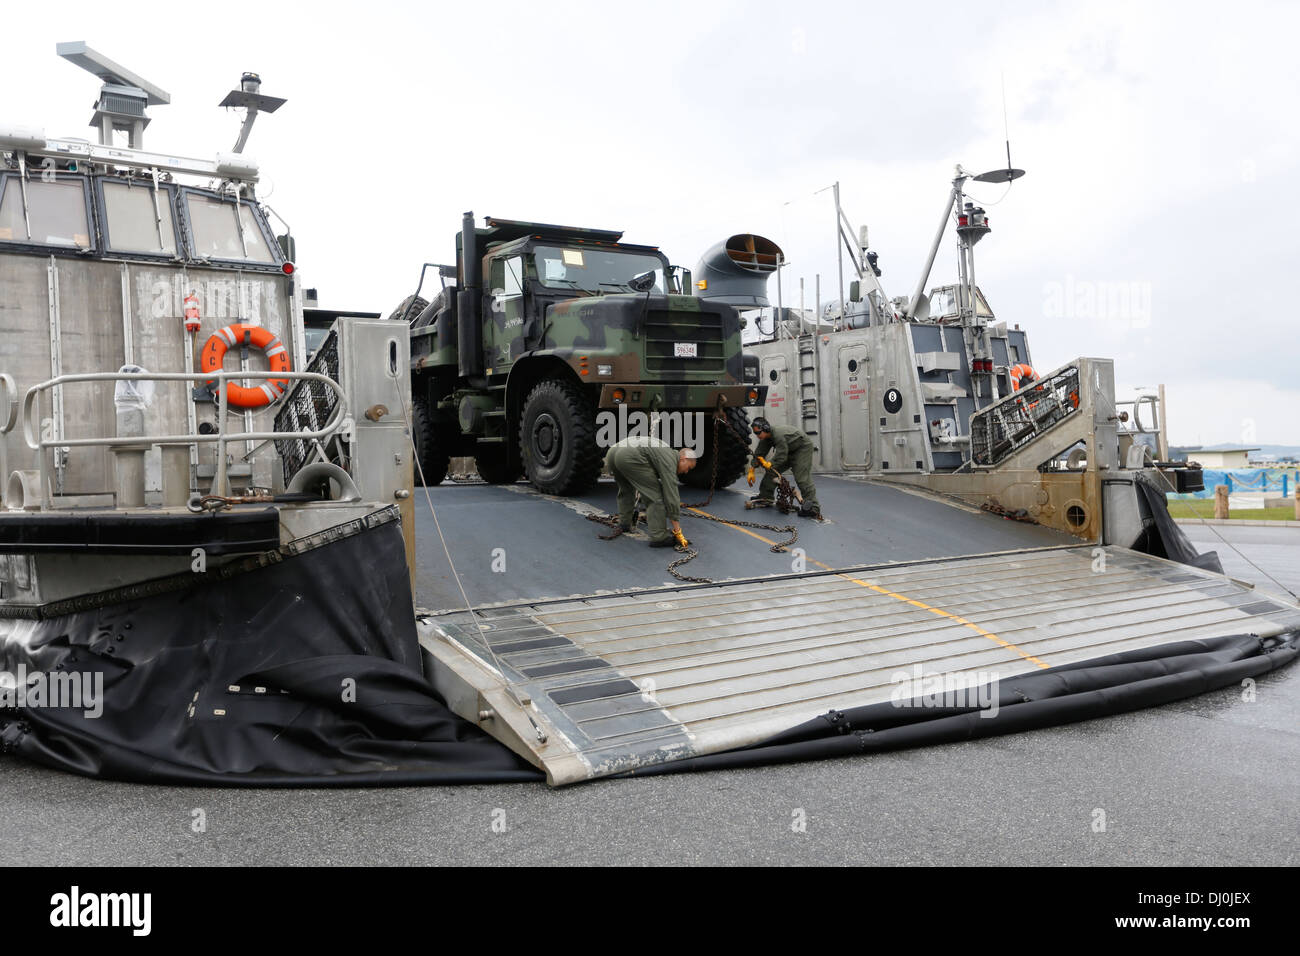 U.S. Sailors with the 31st Marine Expeditionary Unit, III Marine Expeditionary Force, chain down vehicles and equipment onto a Landing Craft Air Cushion at U.S. Navy White Beach Port Facility, Okinawa, Japan, Nov. 16, 2013. The Marines and Sailors loaded Stock Photo